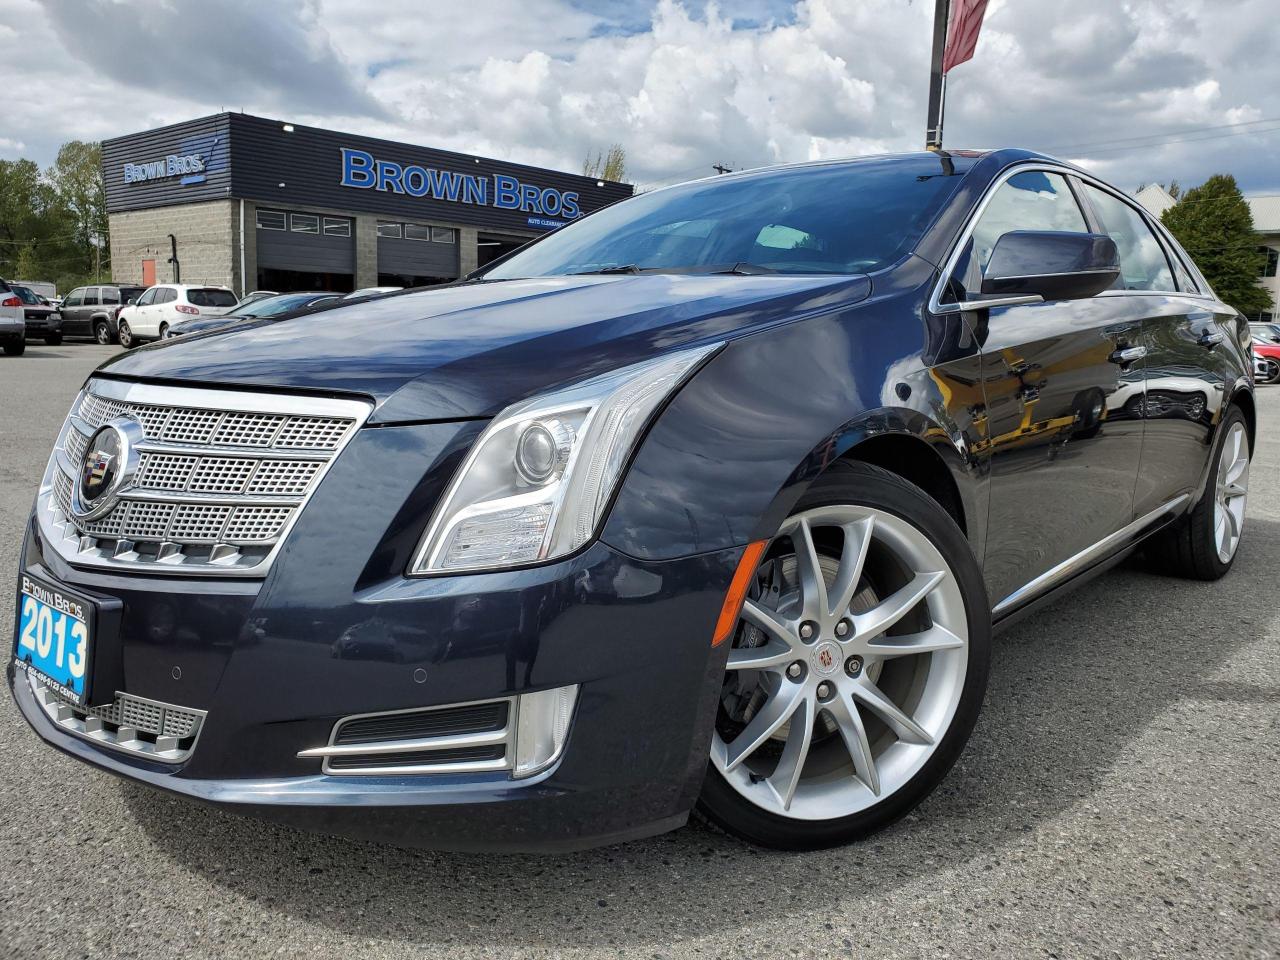 Used 2013 Cadillac XTS Platinum AWD, LOCAL, LOADED for Sale in Surrey